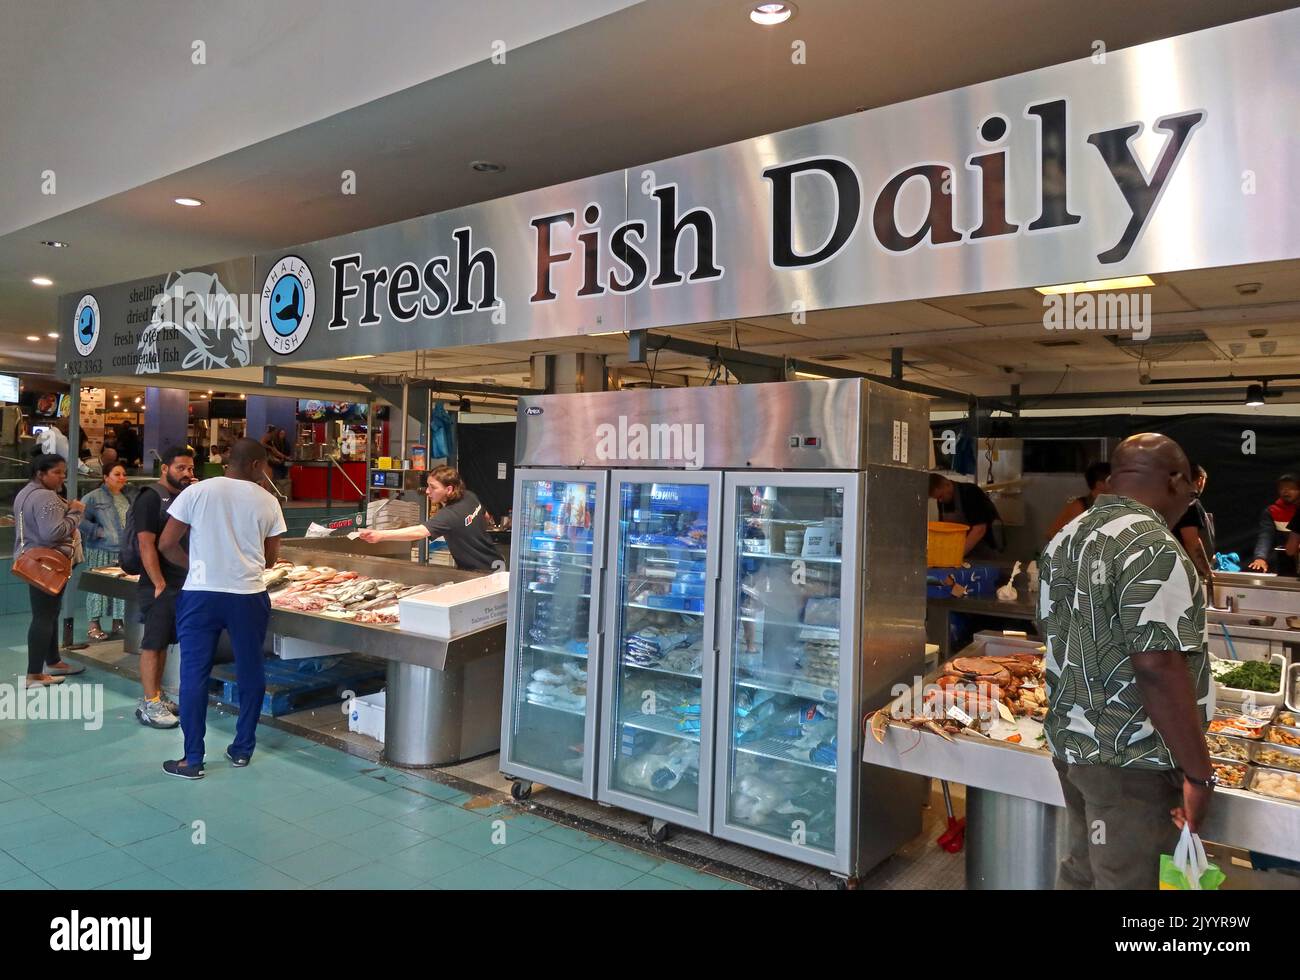 Manchester indoor market fishmonger, Fresh Fish Daily, Whales Fish stall , Arndale Centre, High St. Manchester, England, UK, M4 2HU Stock Photo